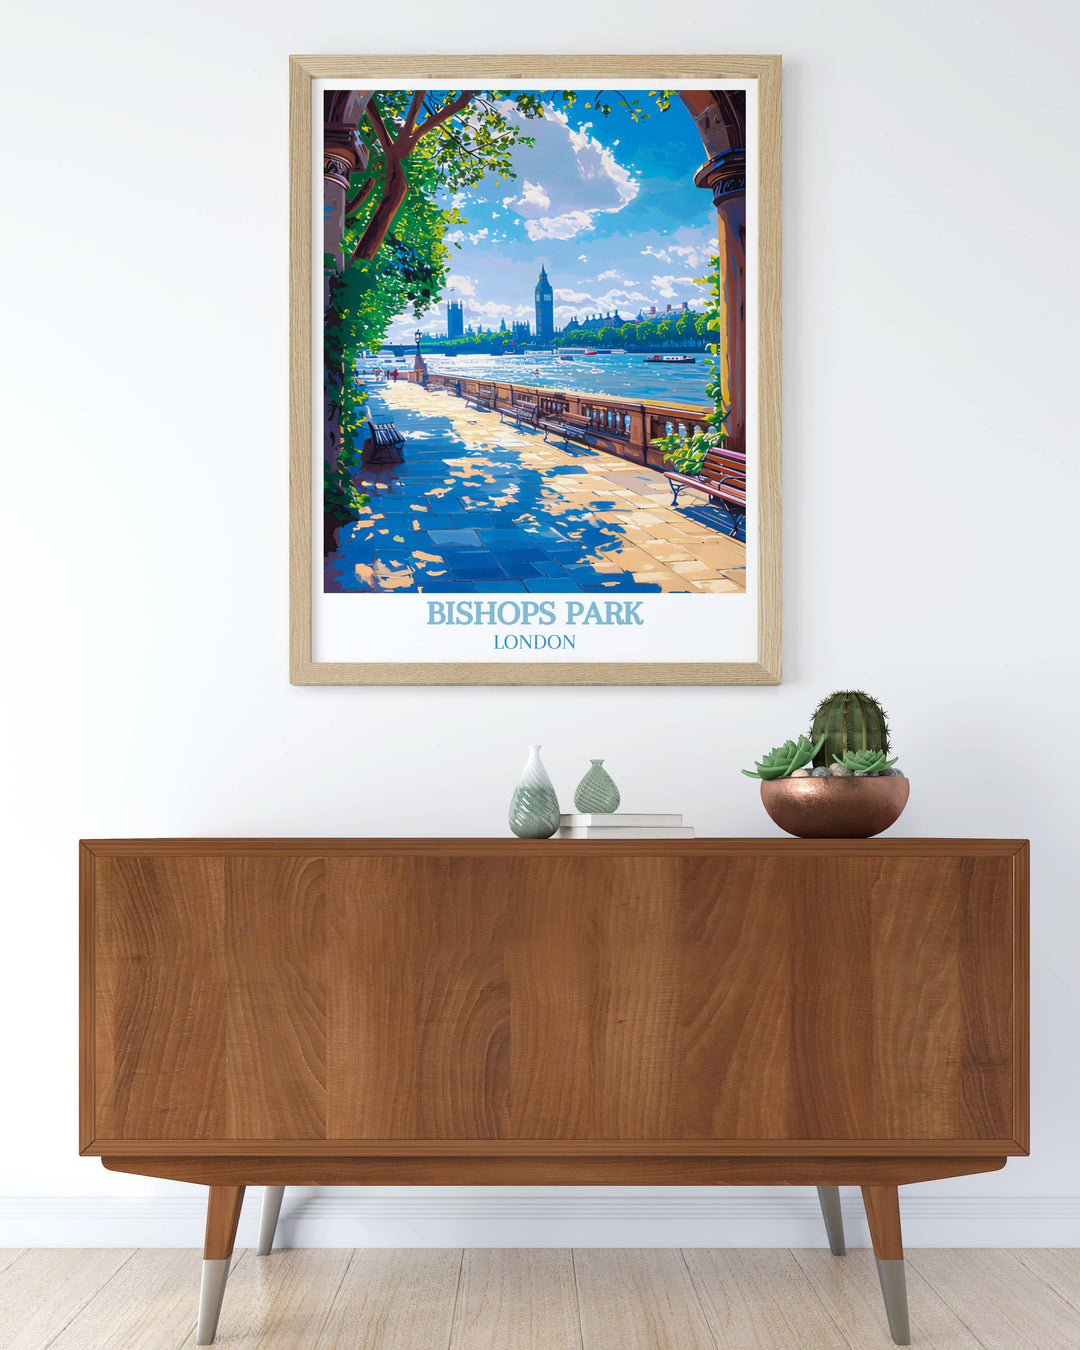 Londons Thames River Walk illustrated in a stunning print capturing the essence of this popular walking path along the river